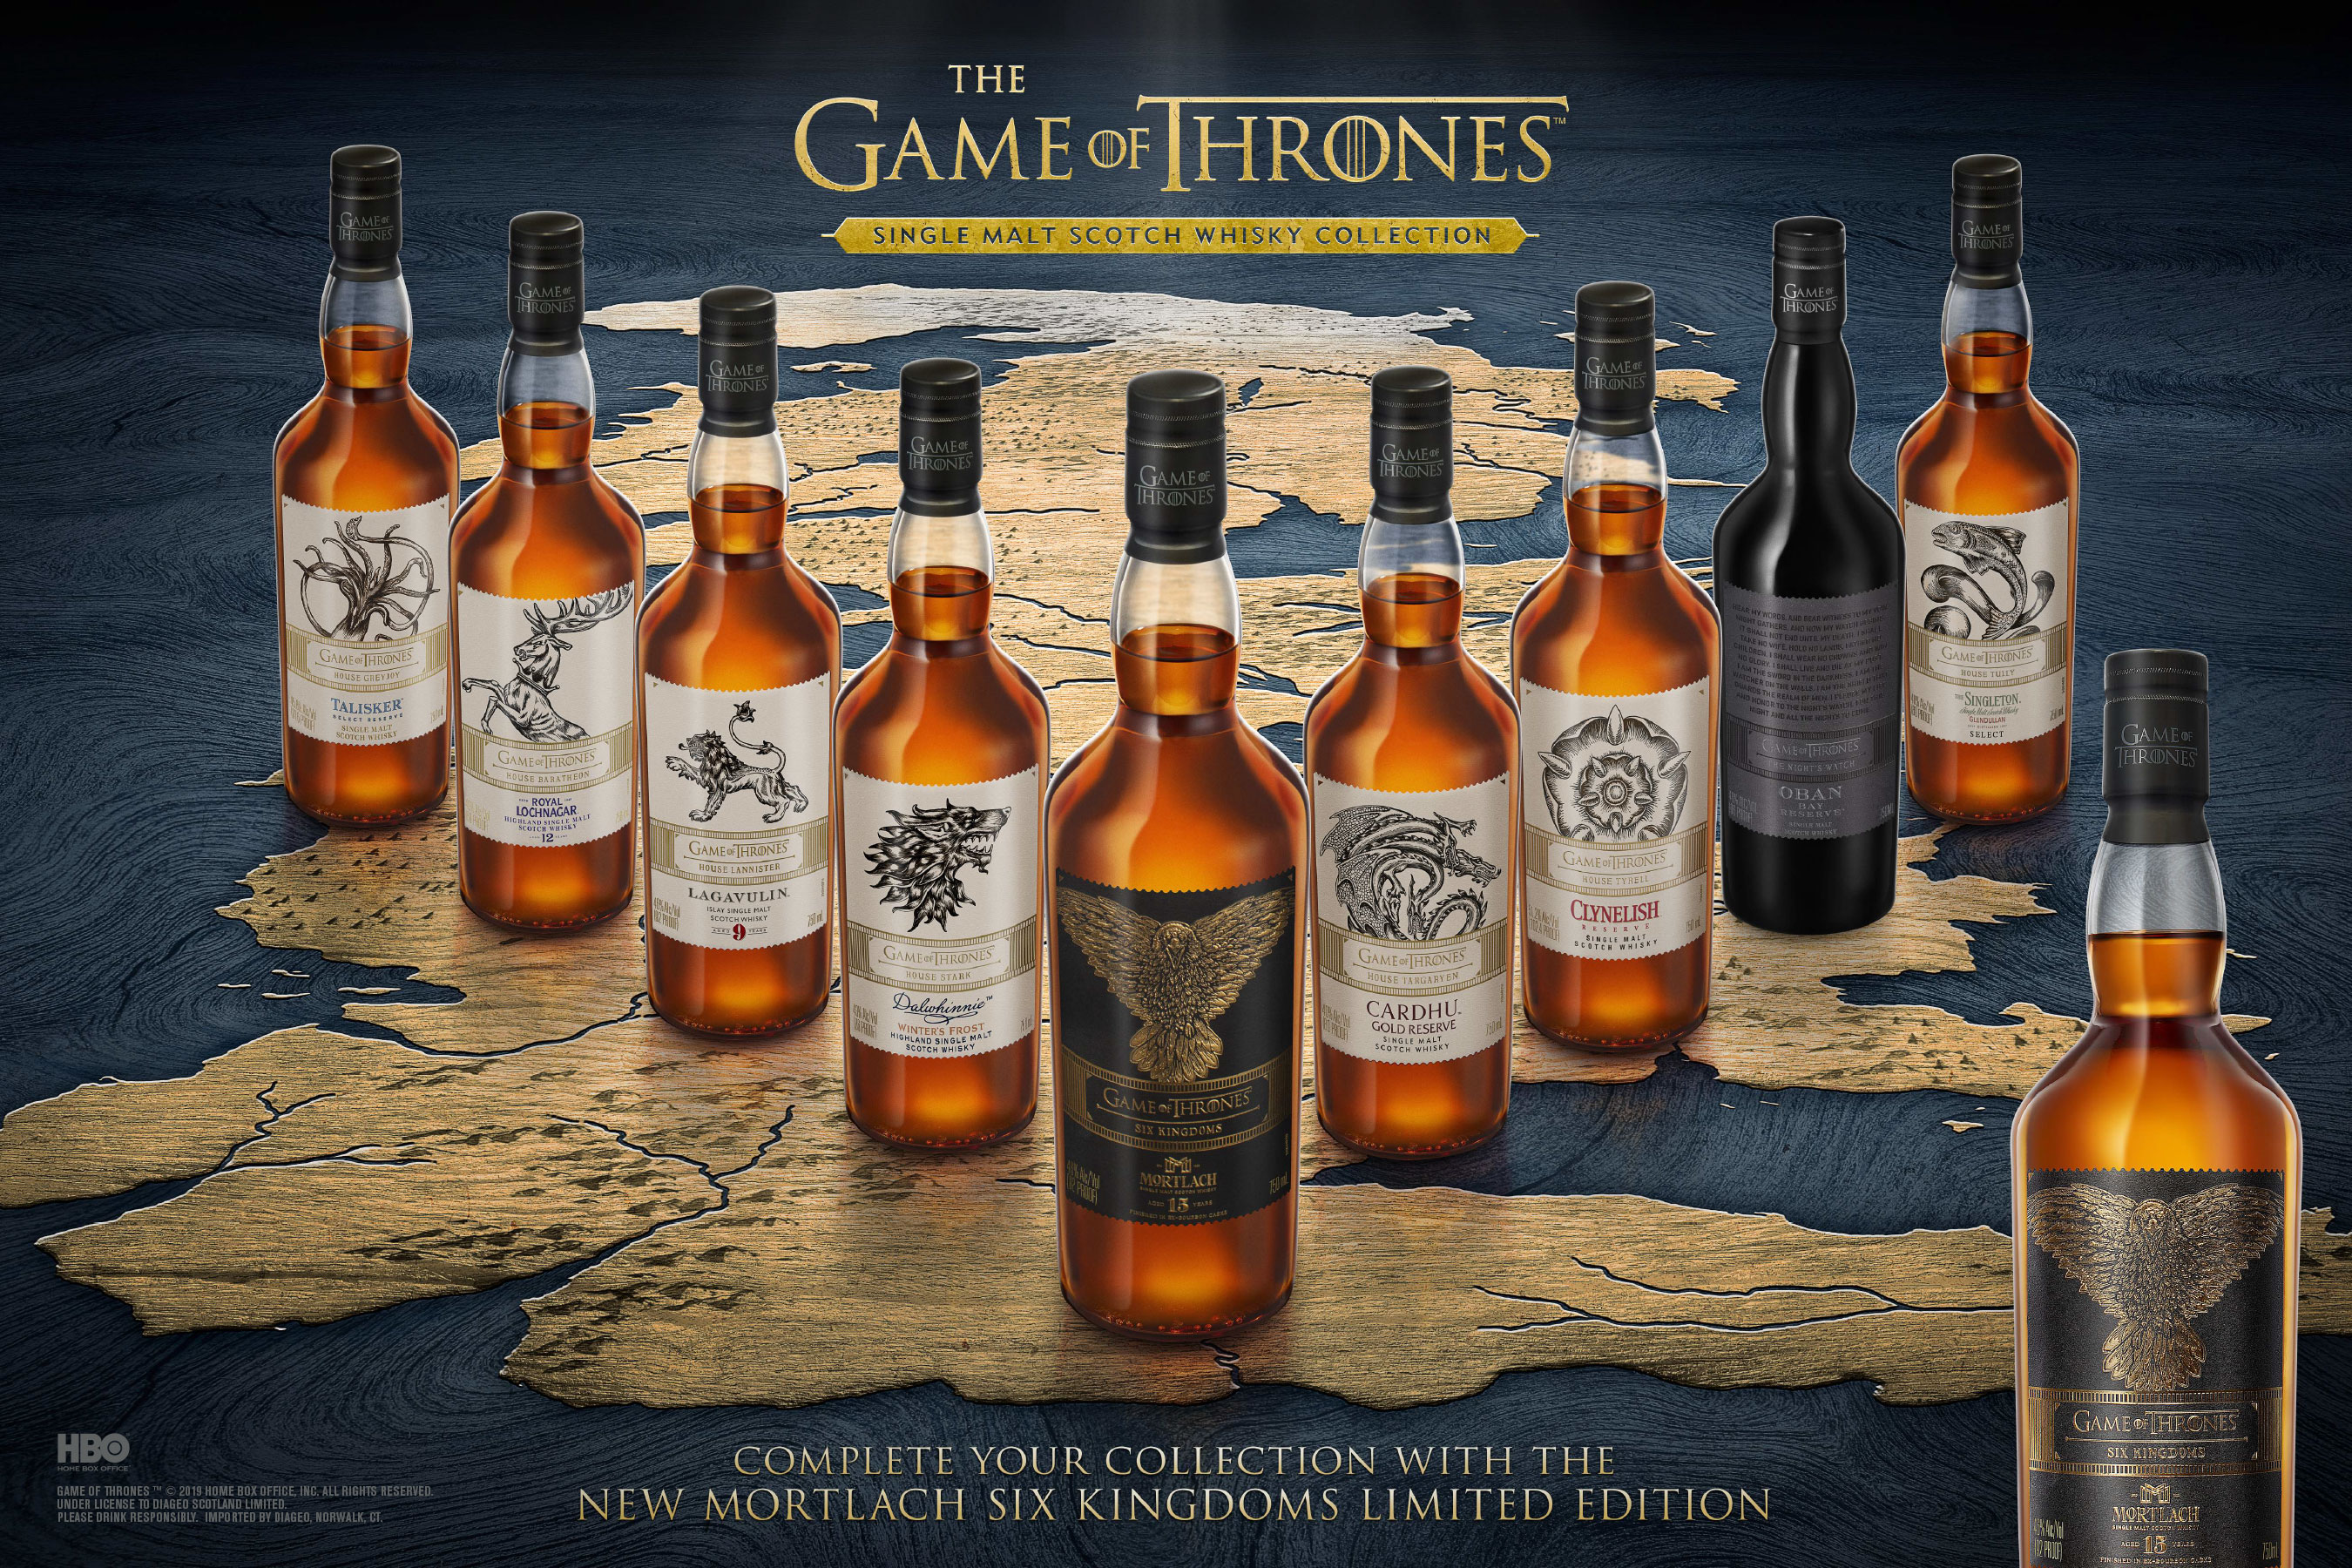 Complete Your Collection with the New Game of Thrones Six Kingdoms - Mortlach Aged 15 Years